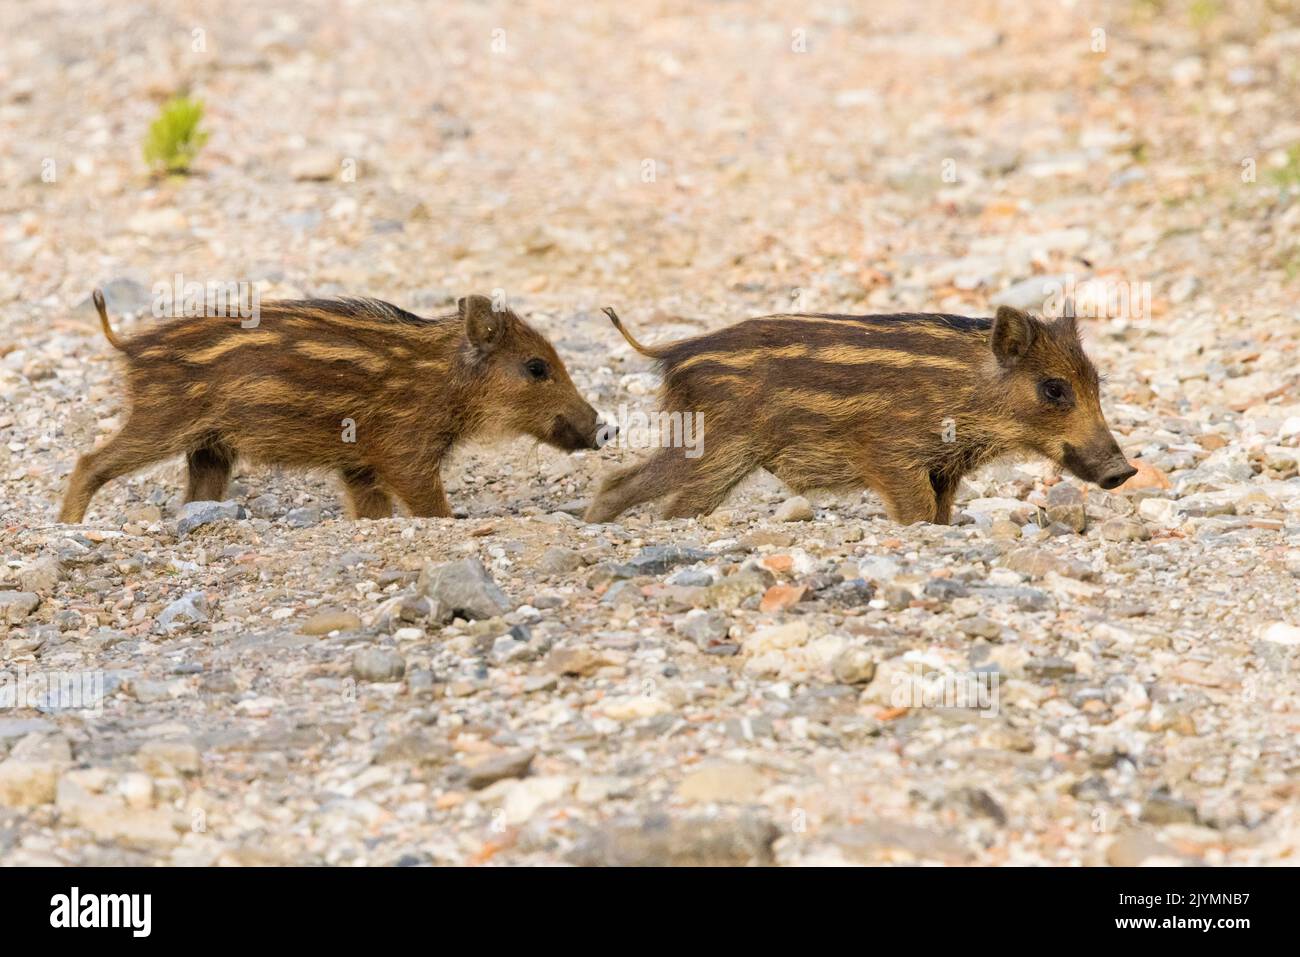 Wild Boar (Sus scrofa), two cubs standing on the ground, Campania, Italy Stock Photo